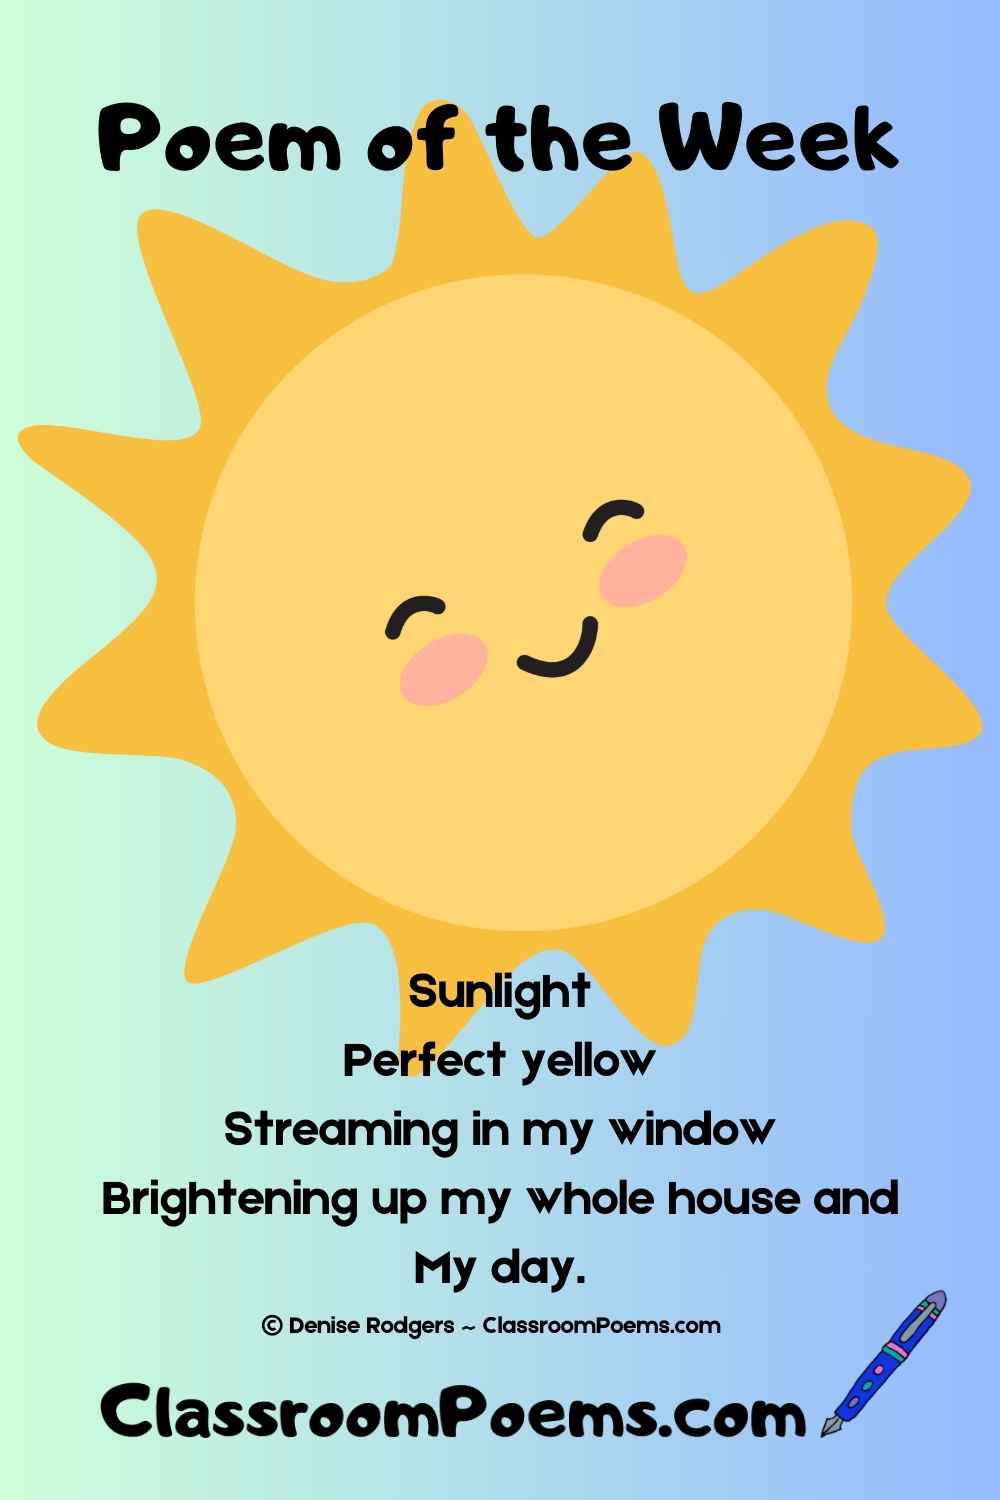 A Cinquain Sunshine poem, the Poem of the Week by Denise Rodgers on ClassroomPoems.com.